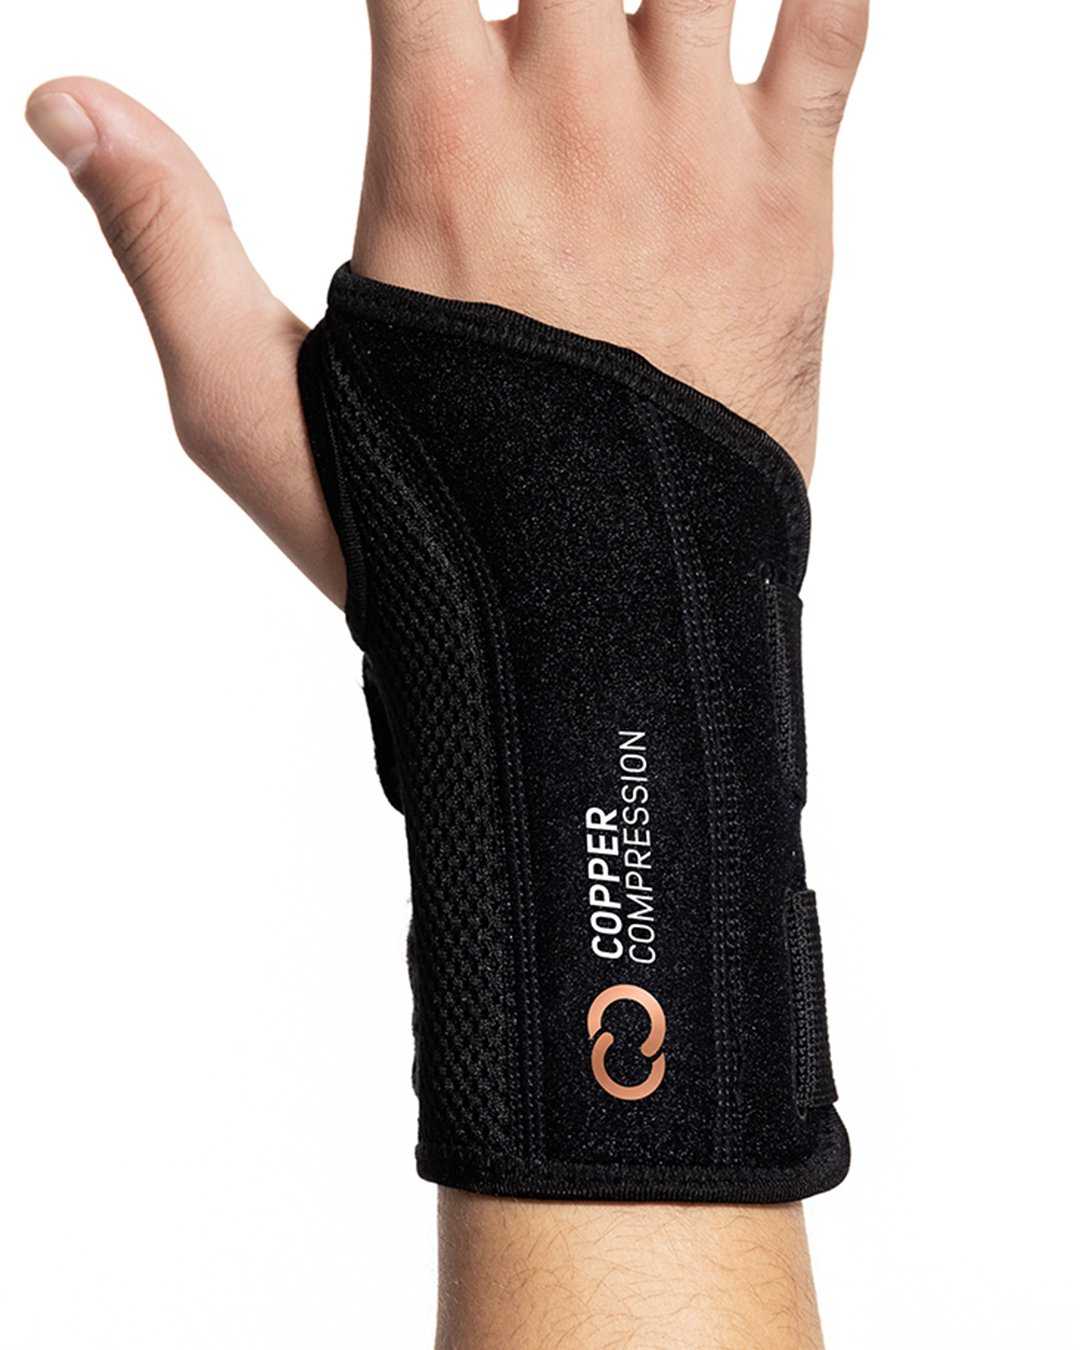 INDEEMAX Copper Wrist Compression Sleeve 1 Pair, Comfortable Hand Brace  Support for Arthritis, Tendonitis, Sprains, Workout, Carpal Tunnel - Left 